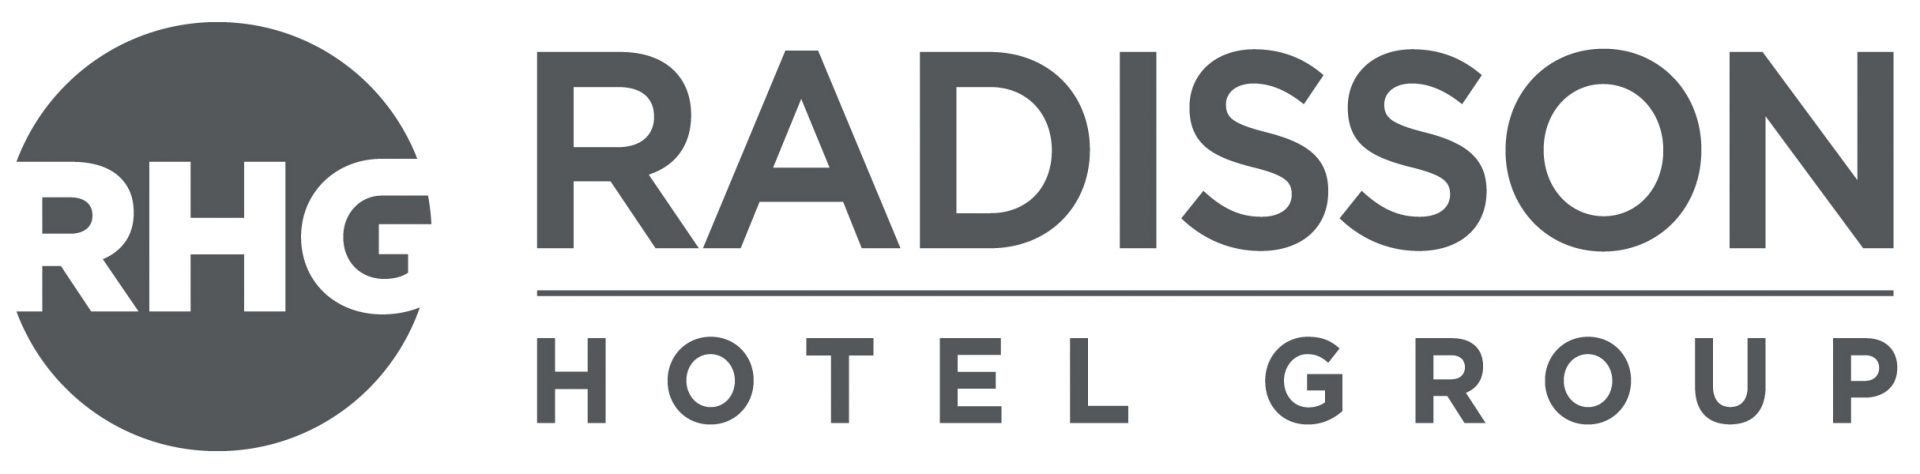 Radisson Hotel Group’s steady ambition to expand in the Middle East